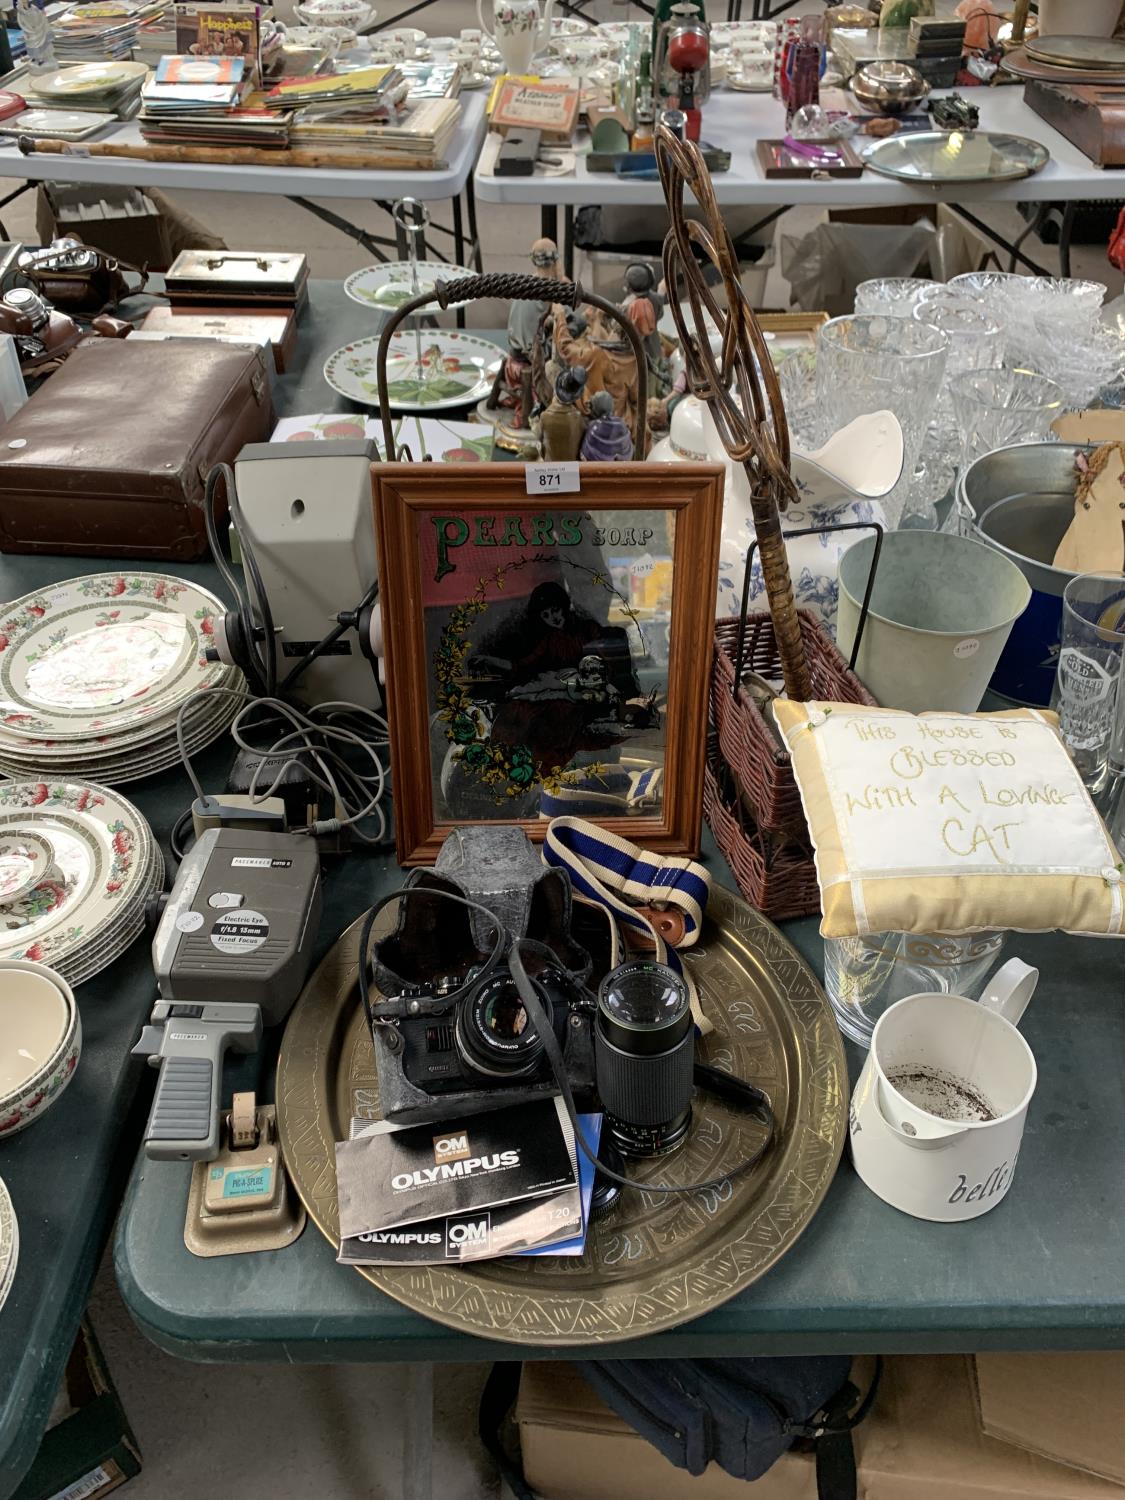 A LARGE MIXED LOT OF ITEMS - PEAR SOAP ADVERTISING MIRROR, BRASS CHARGER ETC